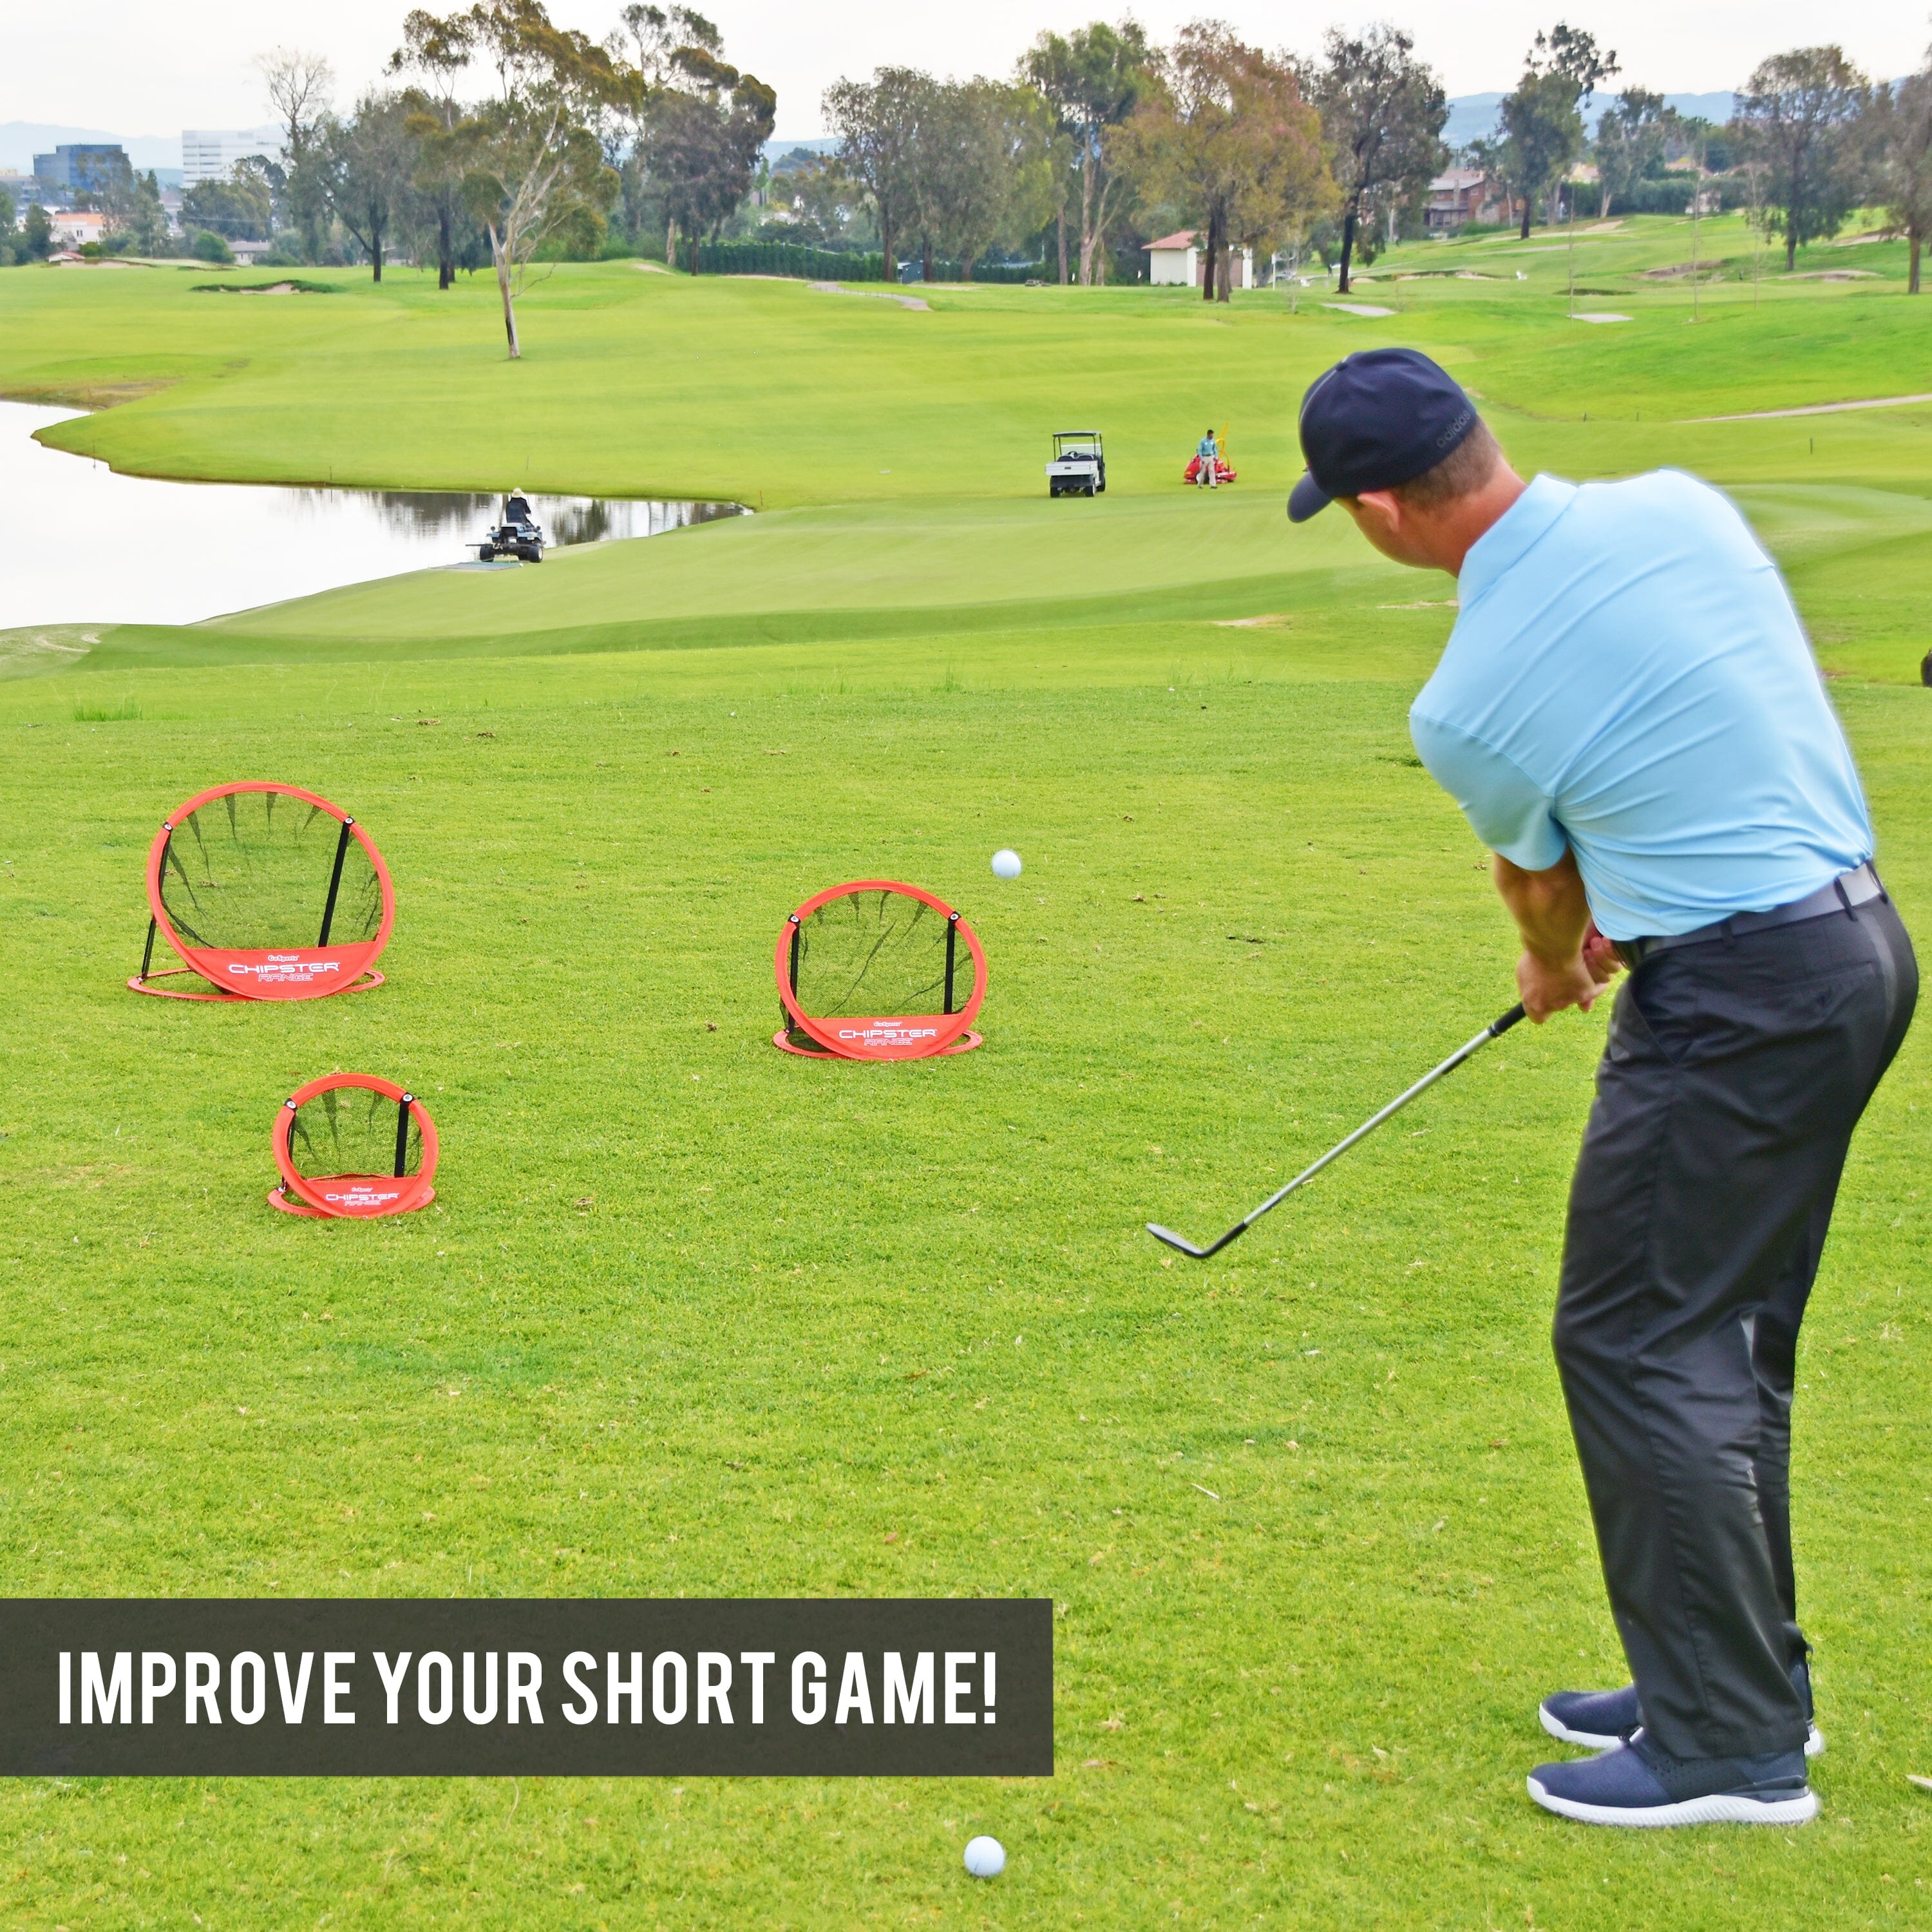 Target Rings Golf Chipping Game - Elevate Your Short Game